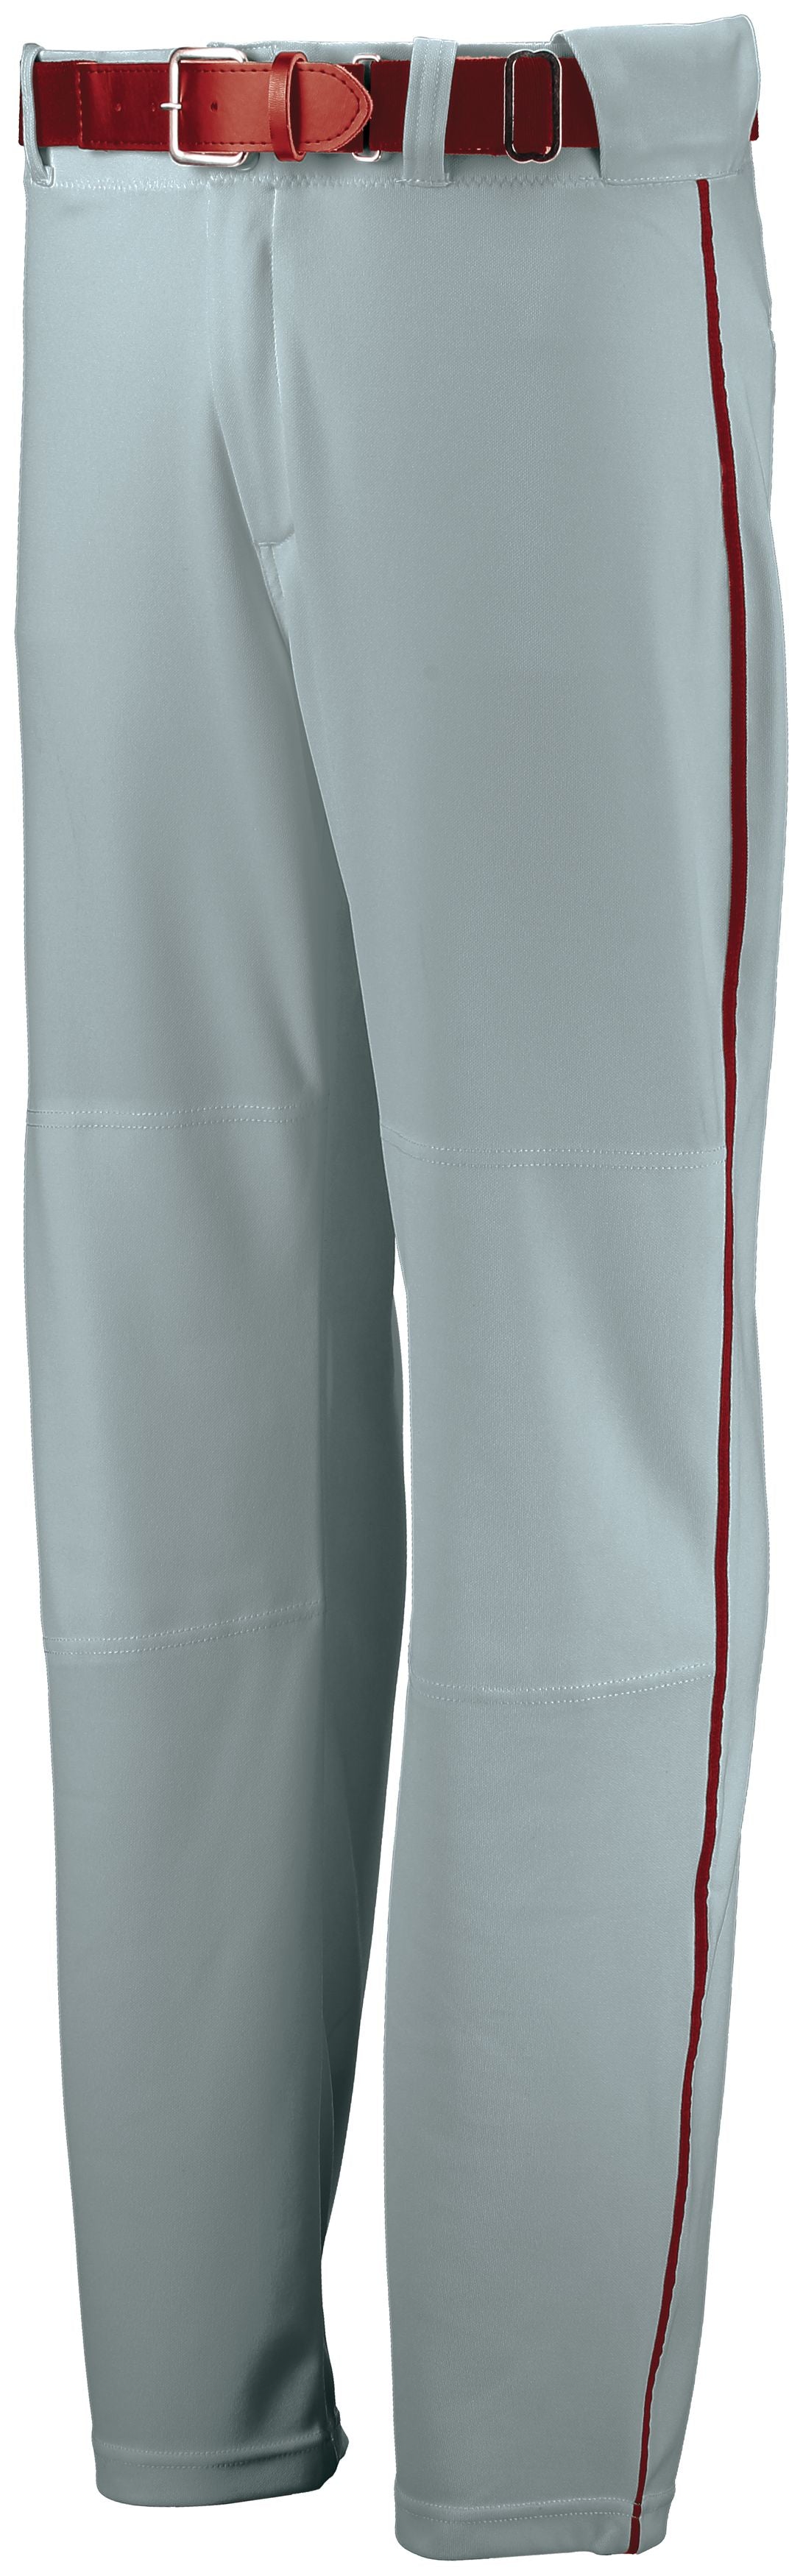 Russell Athletic Open Bottom Piped Pant in Baseball Grey/True Red  -Part of the Adult, Adult-Pants, Pants, Baseball, Russell-Athletic-Products, All-Sports, All-Sports-1 product lines at KanaleyCreations.com